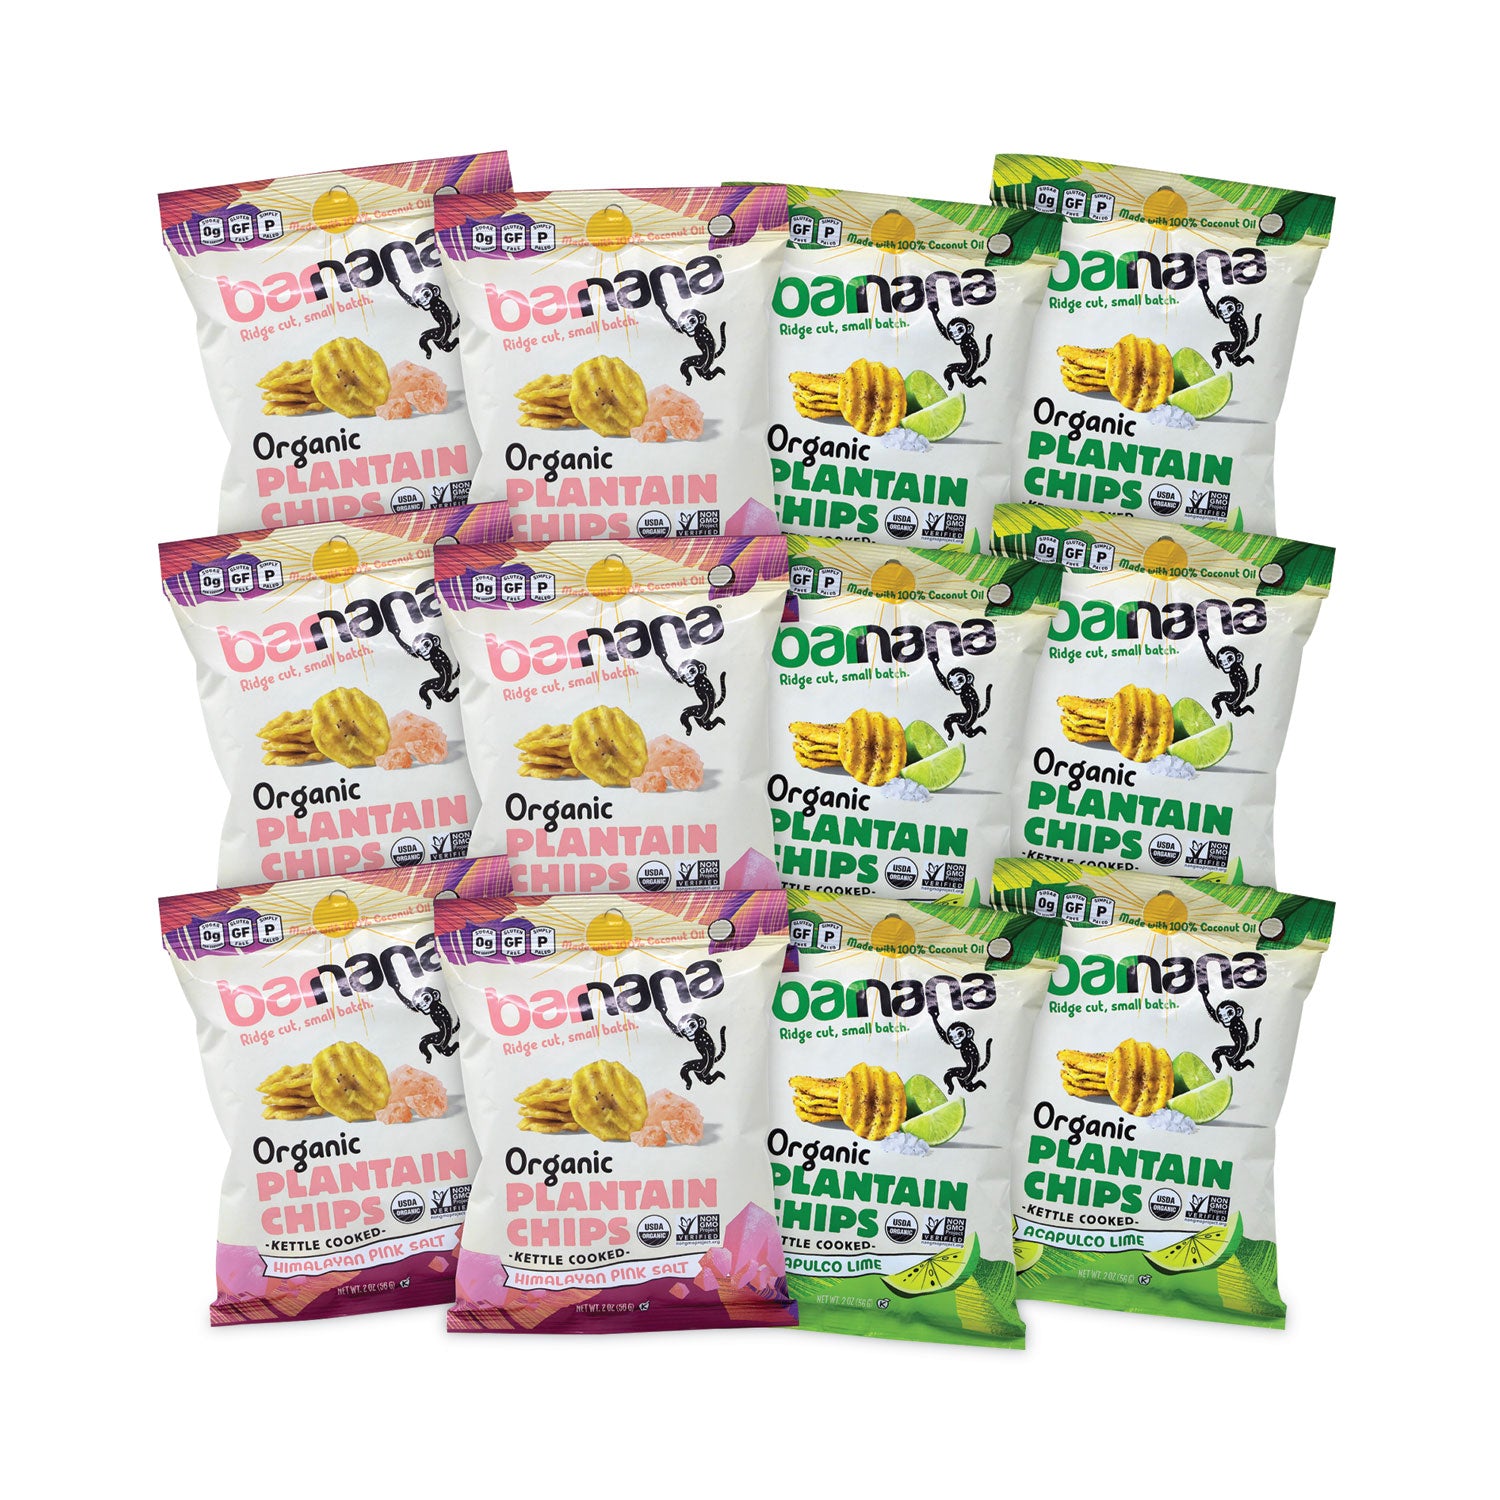 plantain-chip-variety-pack-2-oz-bag-12-pack-ships-in-1-3-business-days_grr60000227 - 2